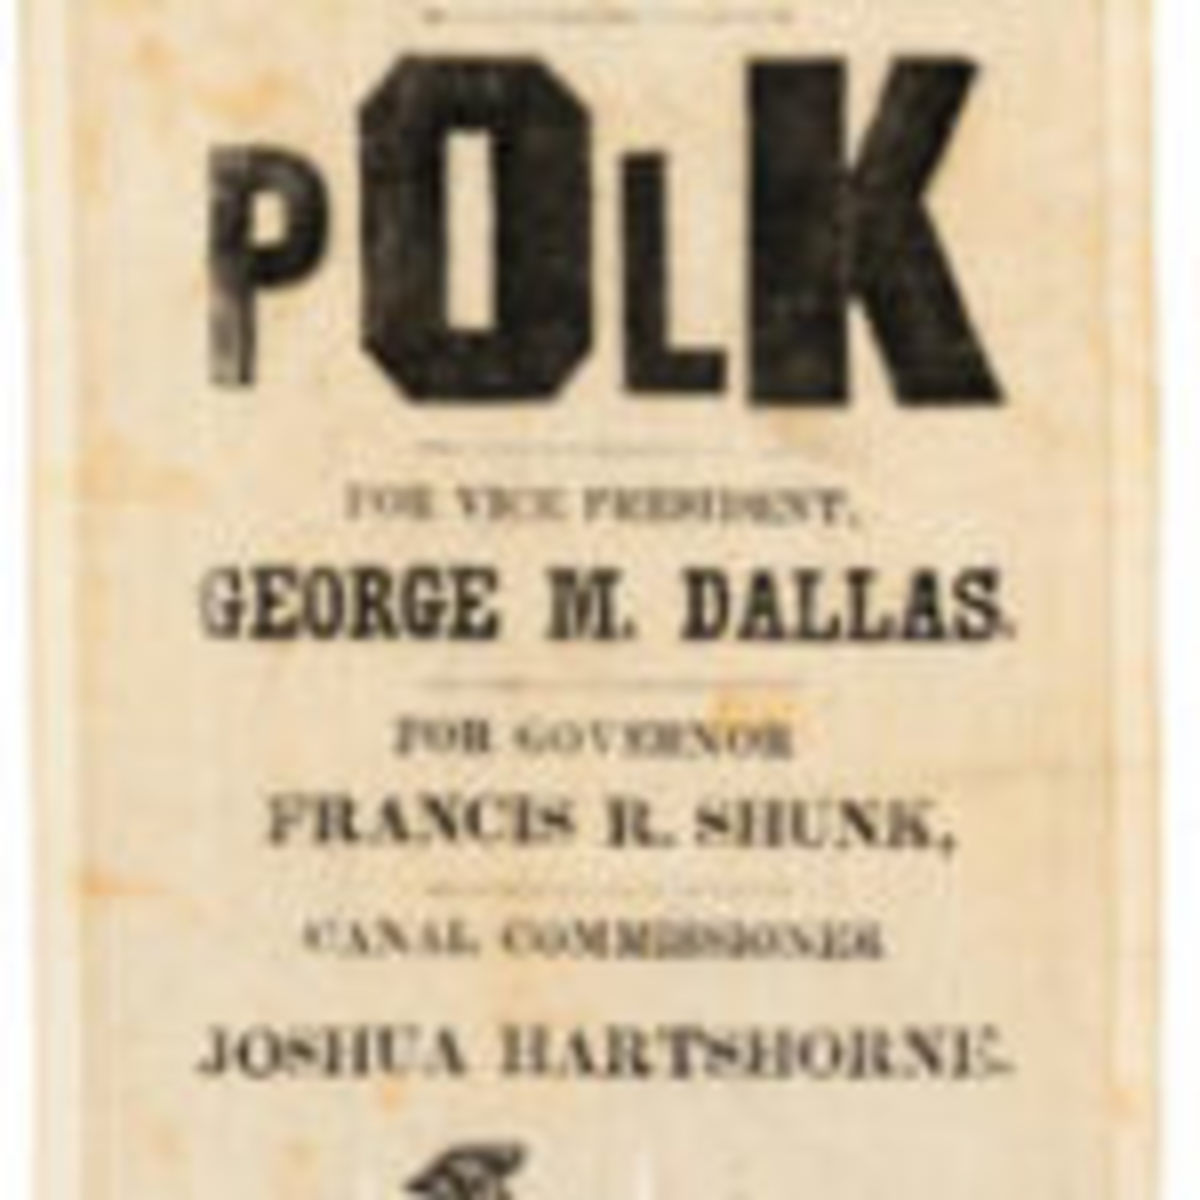  Ribbon, 1844, James Knox Polk, “Justice & Equal Rights Polk,” eagle, wings spread, carries an American flag in its beak and at bottom is stately rooster, rare, 8” l. $4,260Courtesy of Hake’s Auctions, www.hakes.com